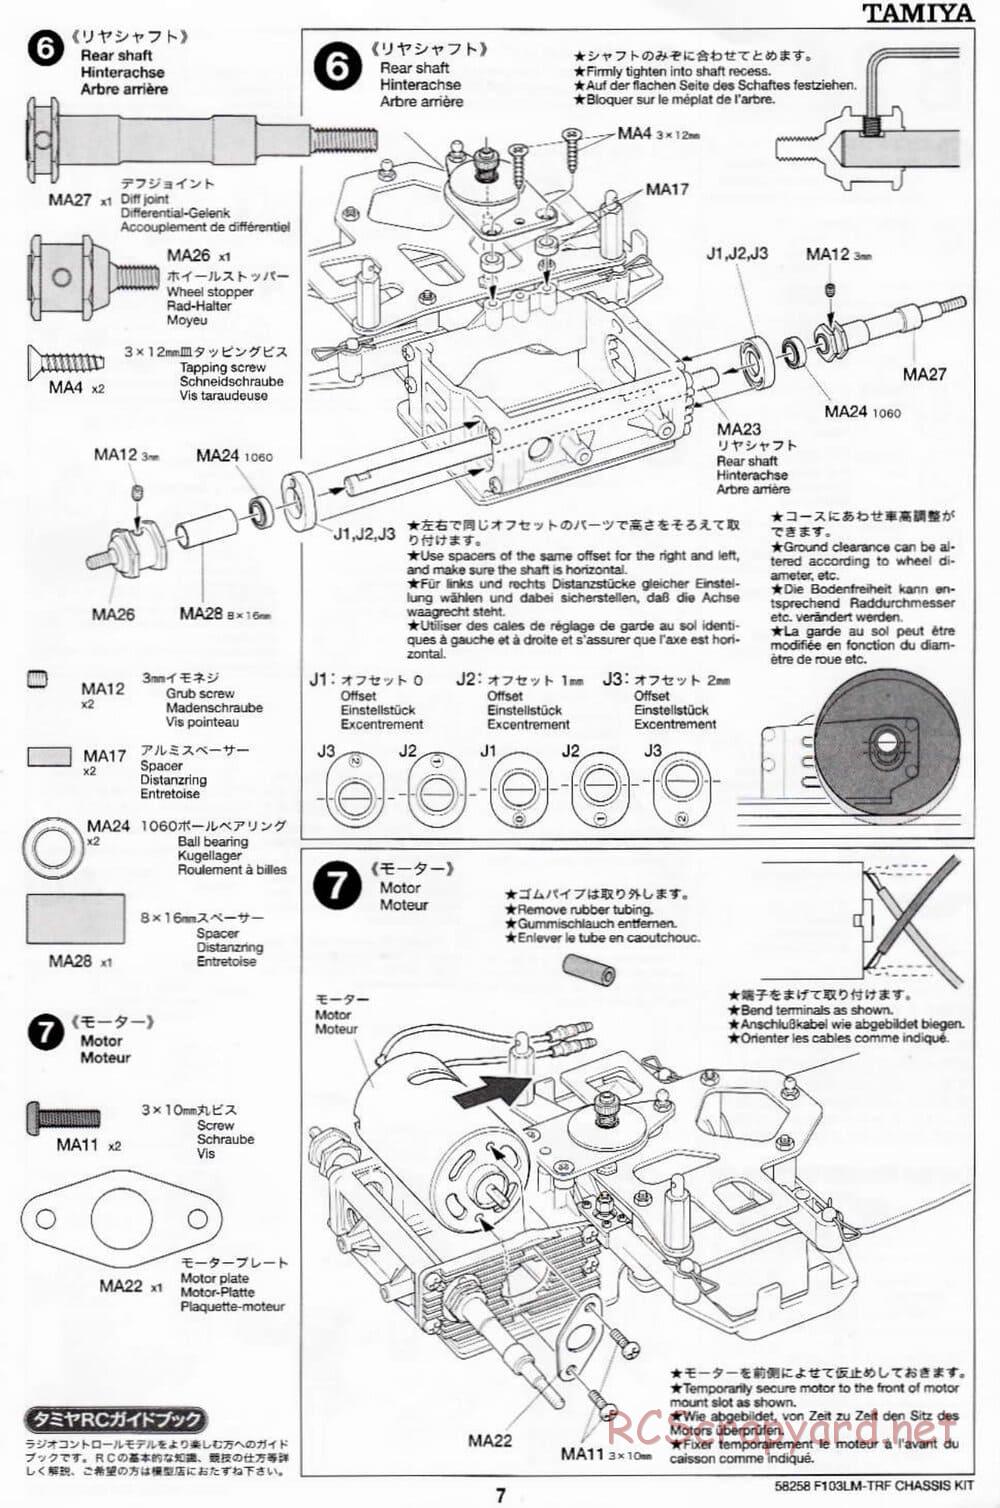 Tamiya - F103LM TRF Special Chassis - Manual - Page 7